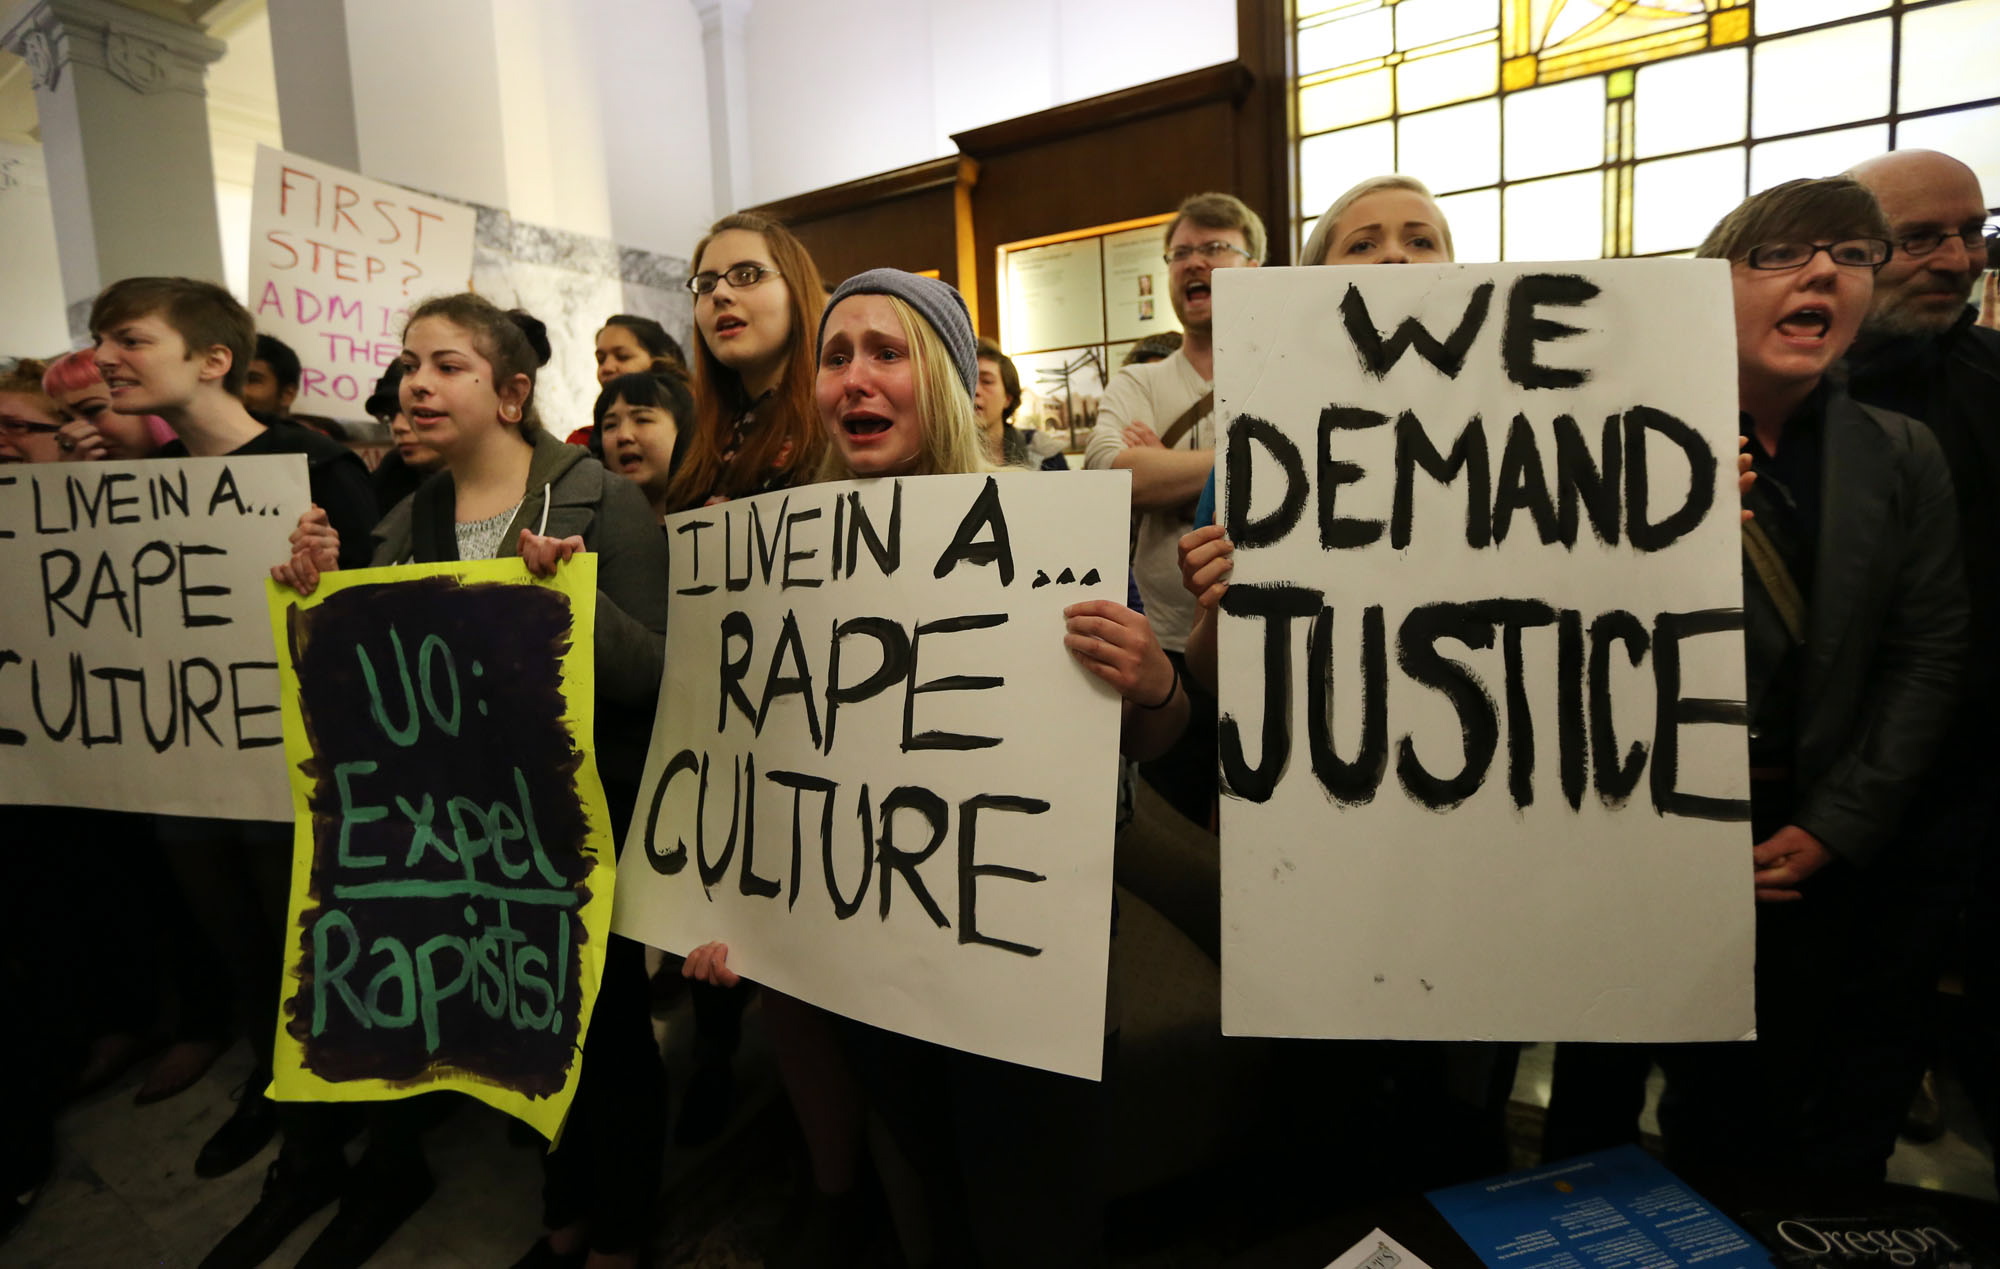 University of Oregon student Samantha Cohen, center, joins a hundred fellow protesters in the lobby of Johnson Hall on the UO campus in Eugene, Ore., Thursday to demand answers from school officials in the wake of allegations of sexual assault by three UO basketball players.